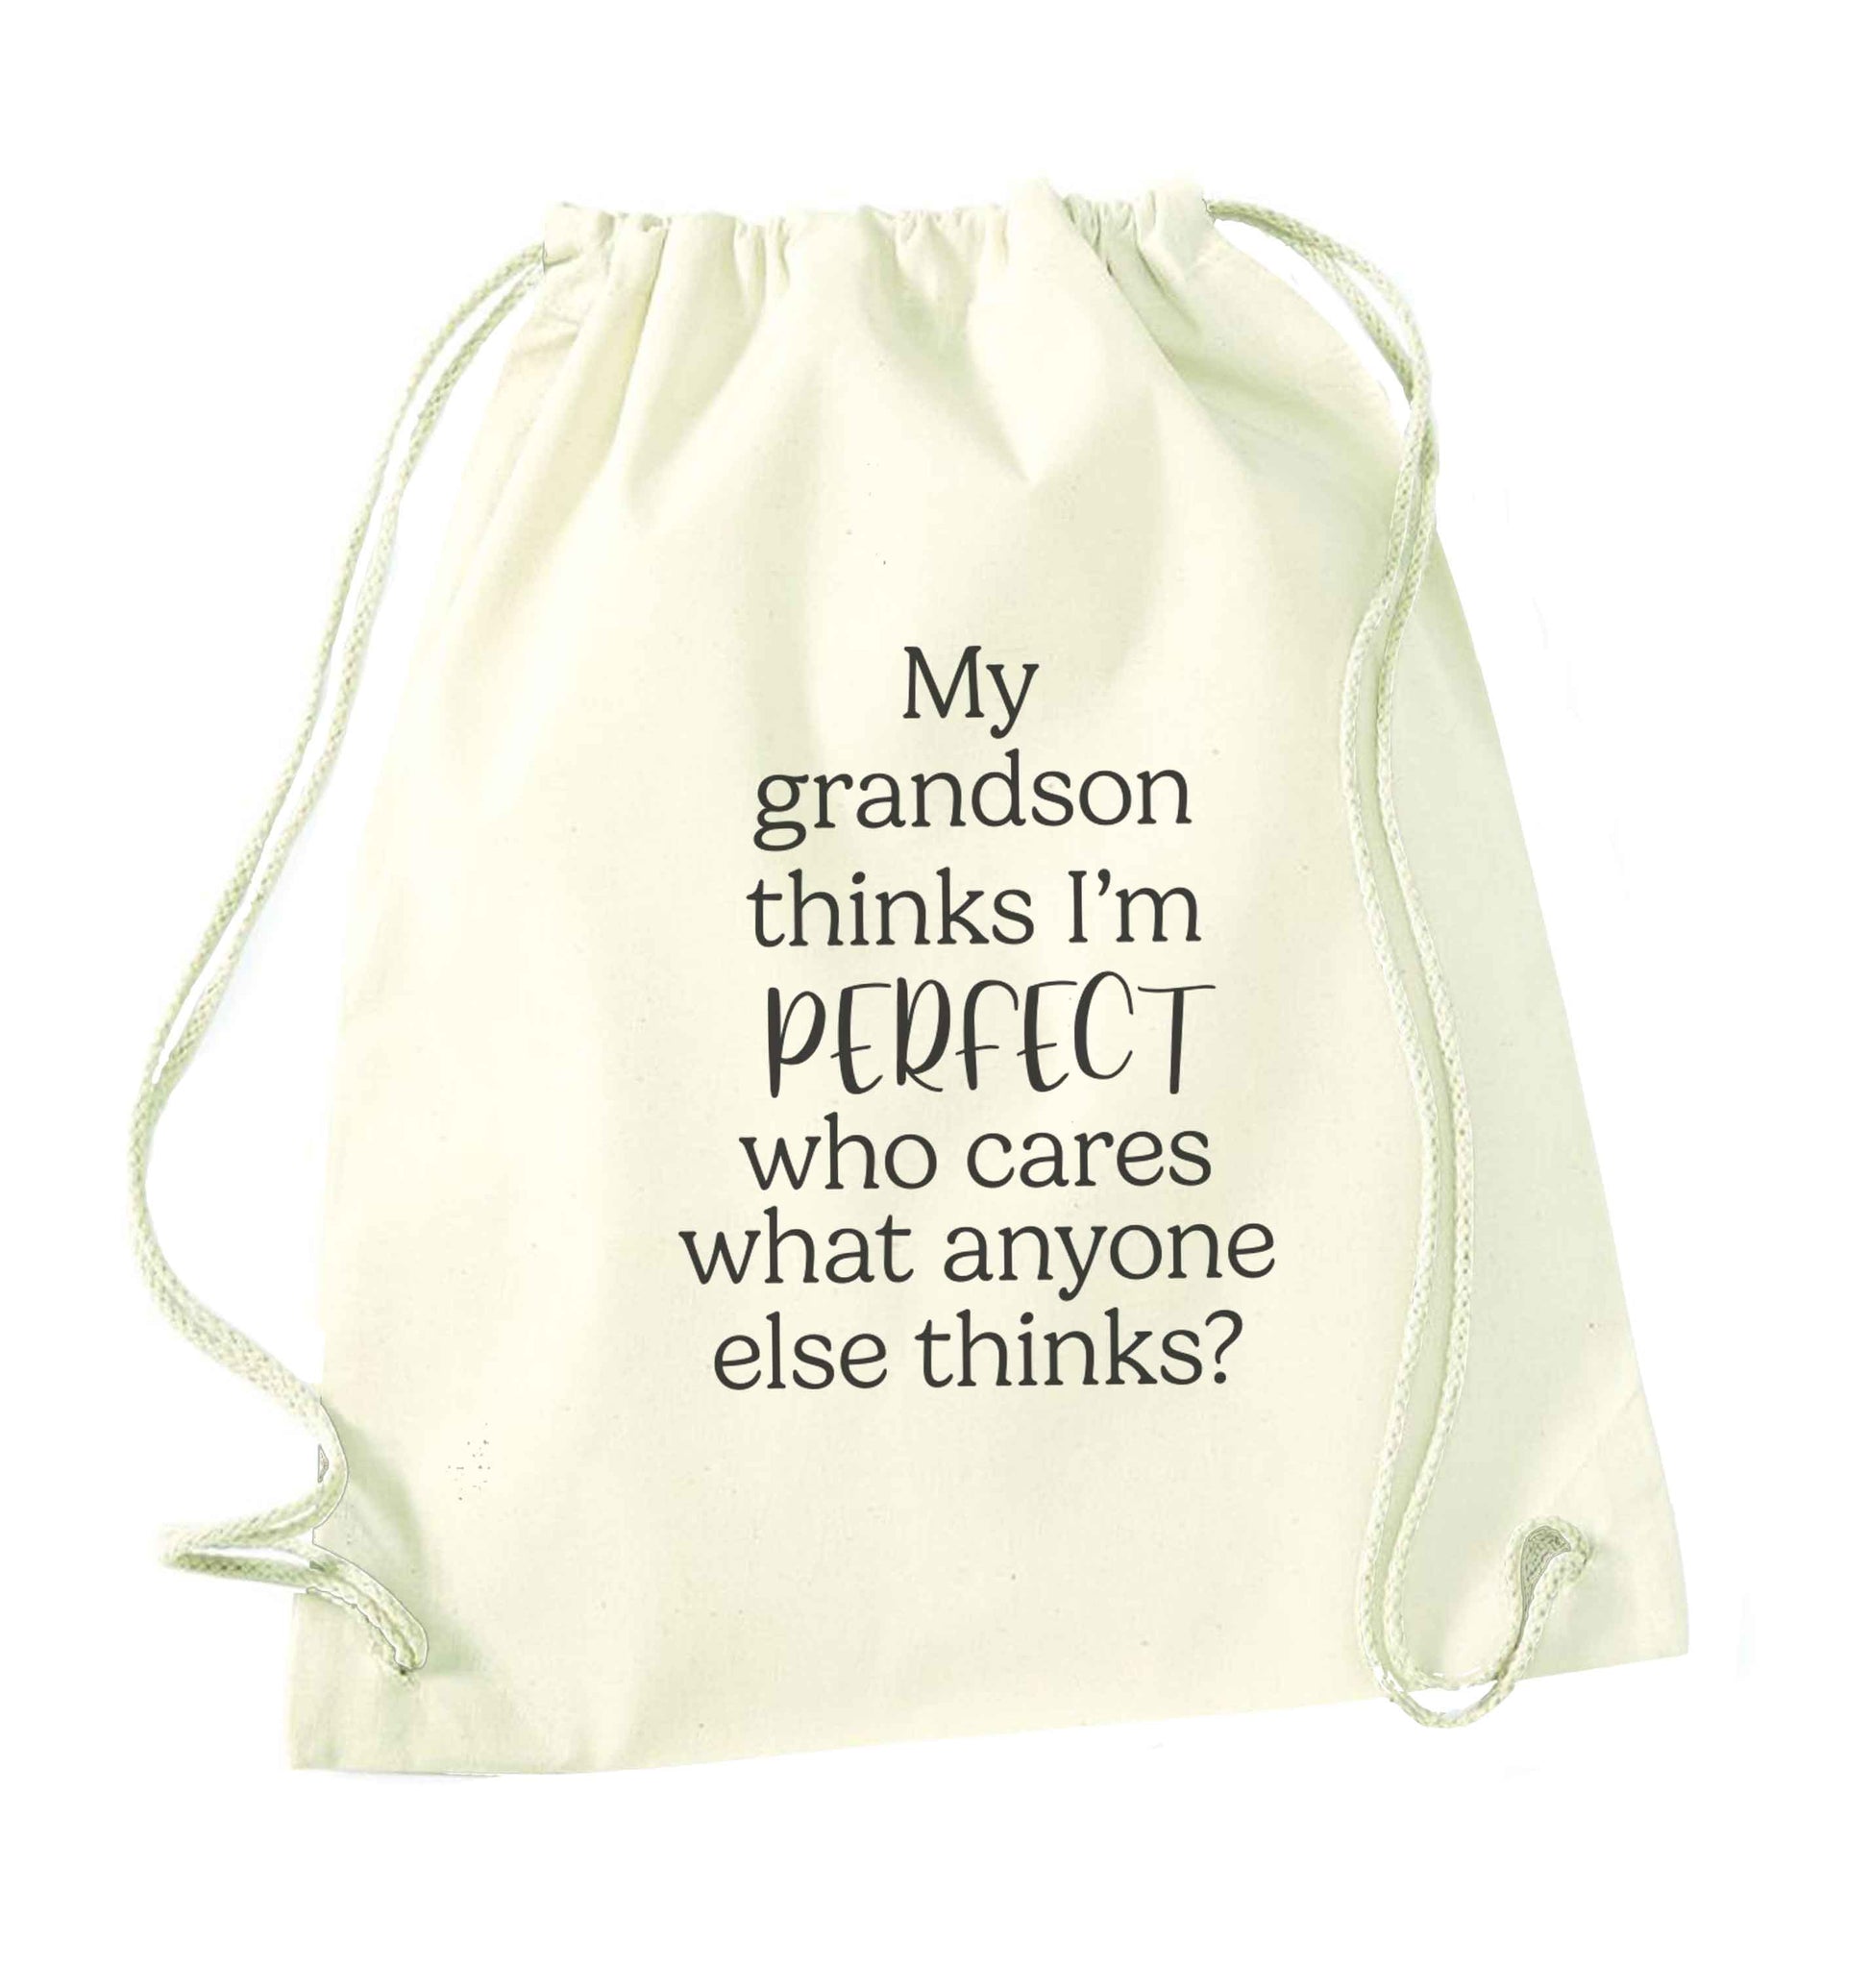 My Grandson thinks I'm perfect who cares what anyone else thinks? natural drawstring bag